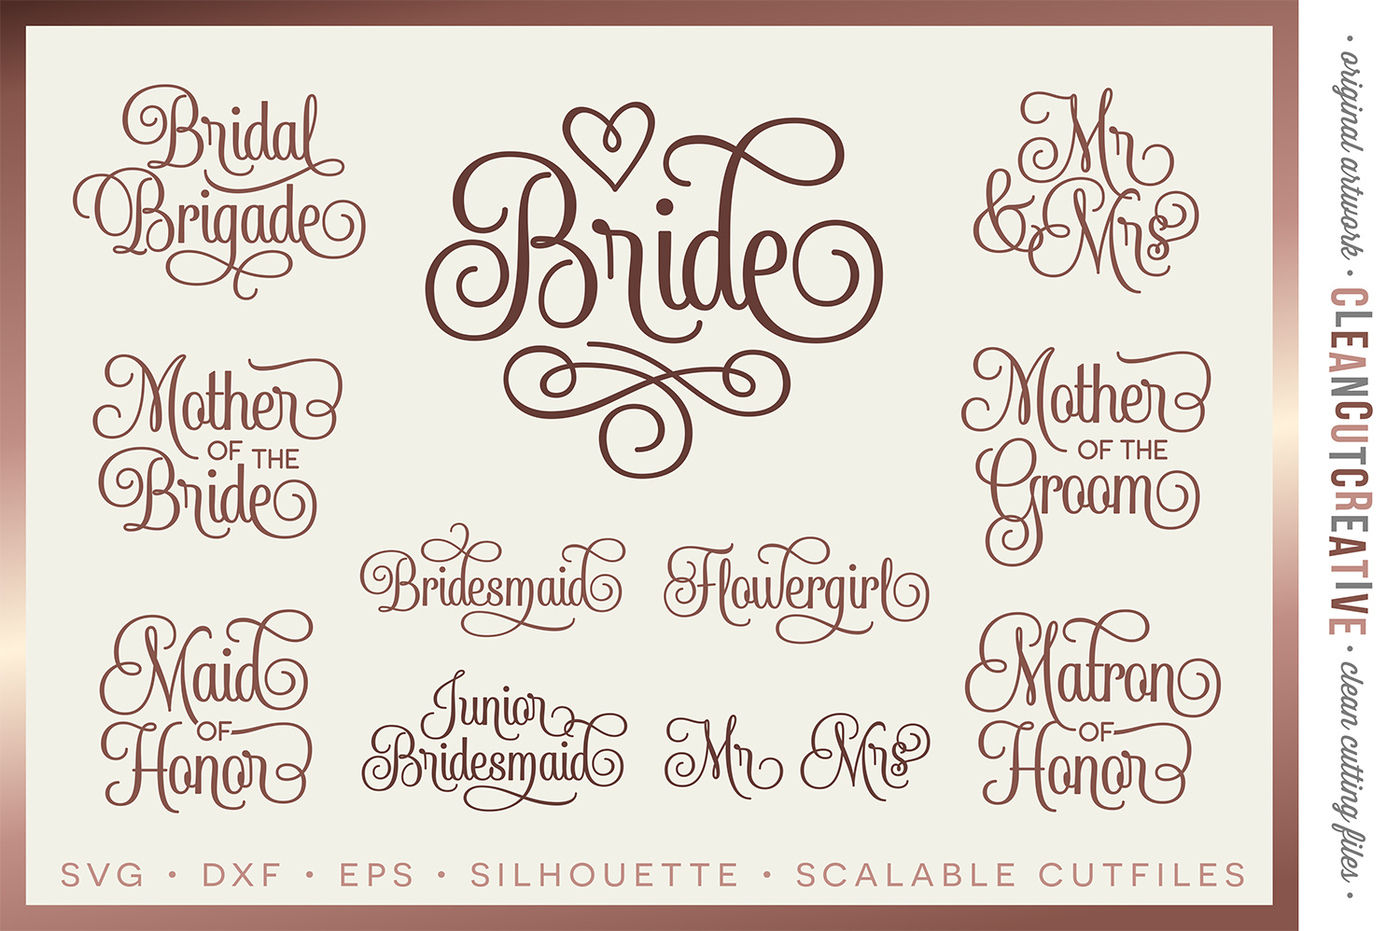 ori 60157 de5968e57bb7794a06cbdd2b3d707e9af5d2dcdc bridal party wedding party set of 11 svg dxf eps png cricut and silhouette clean cutting files